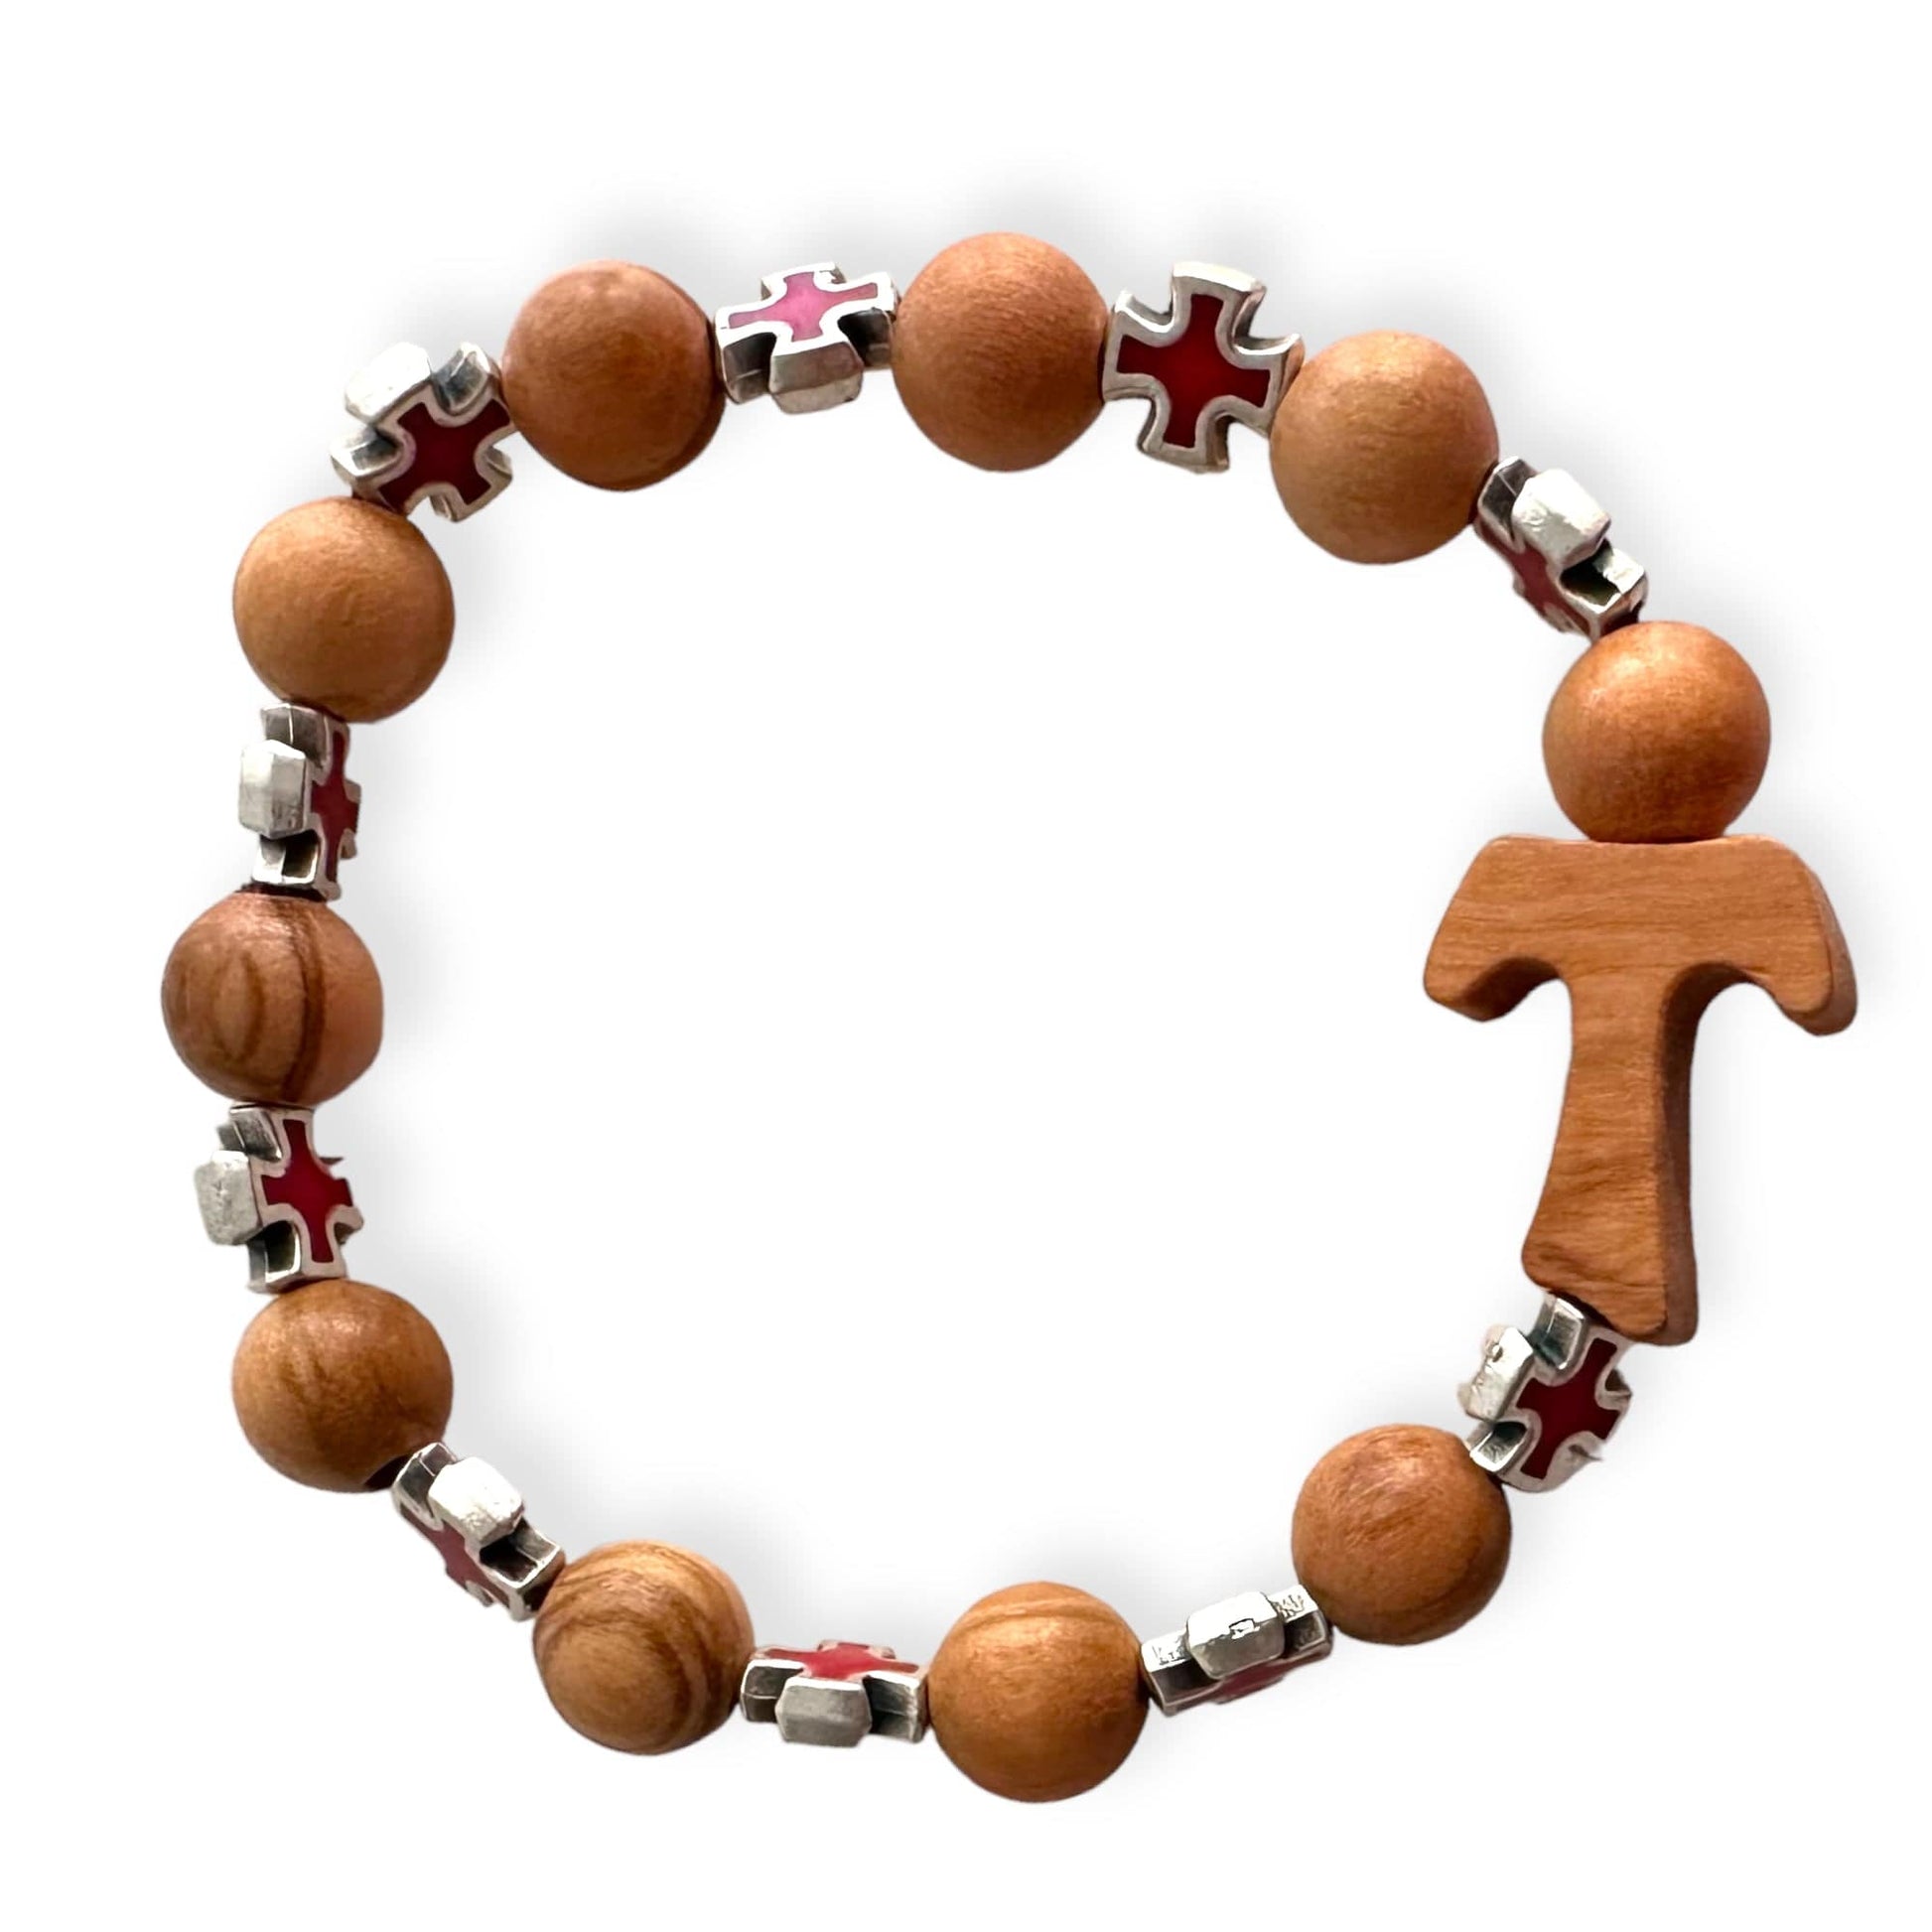 Catholically Bracelet Handcrafted Wooden Bracelet with Tau Cross and Red Celtic Crosses